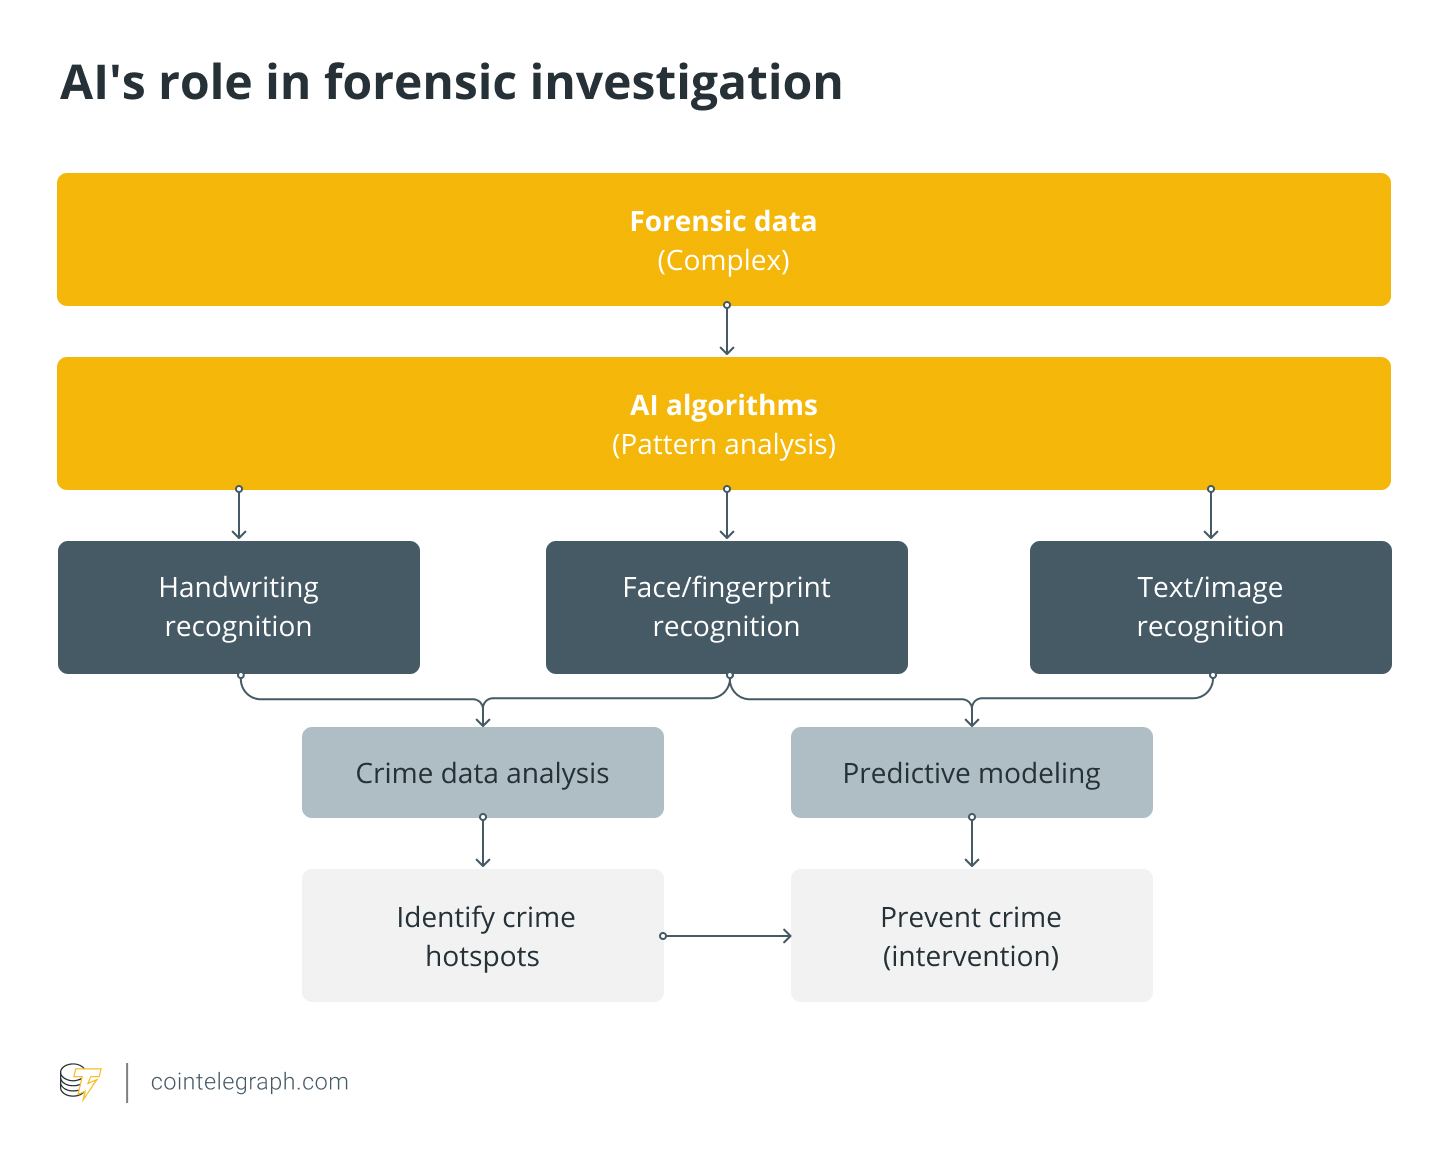 AIs role in forensic investigation